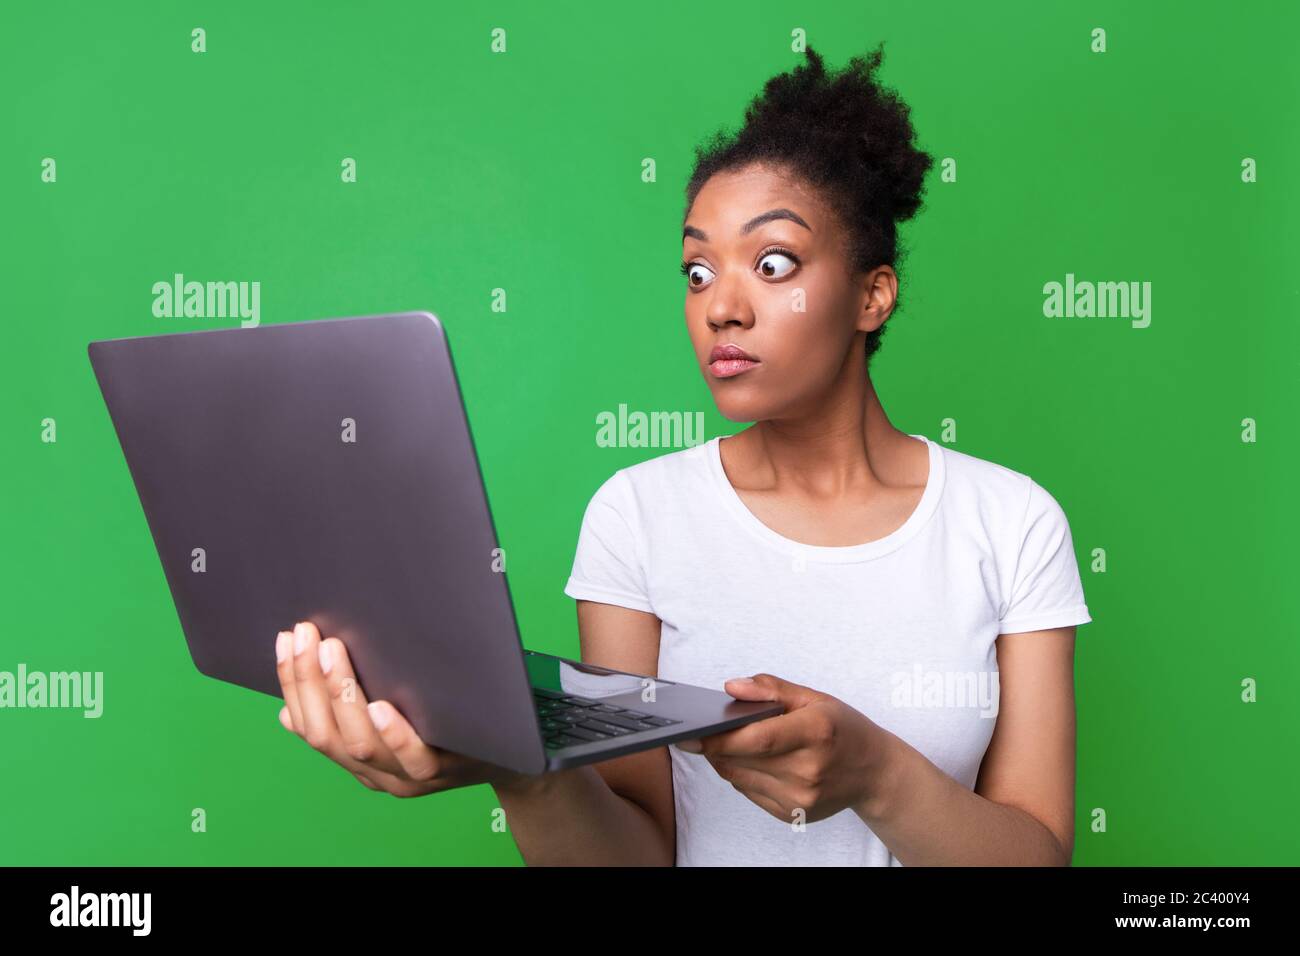 Excited black girl feeling surprised holding laptop Stock Photo